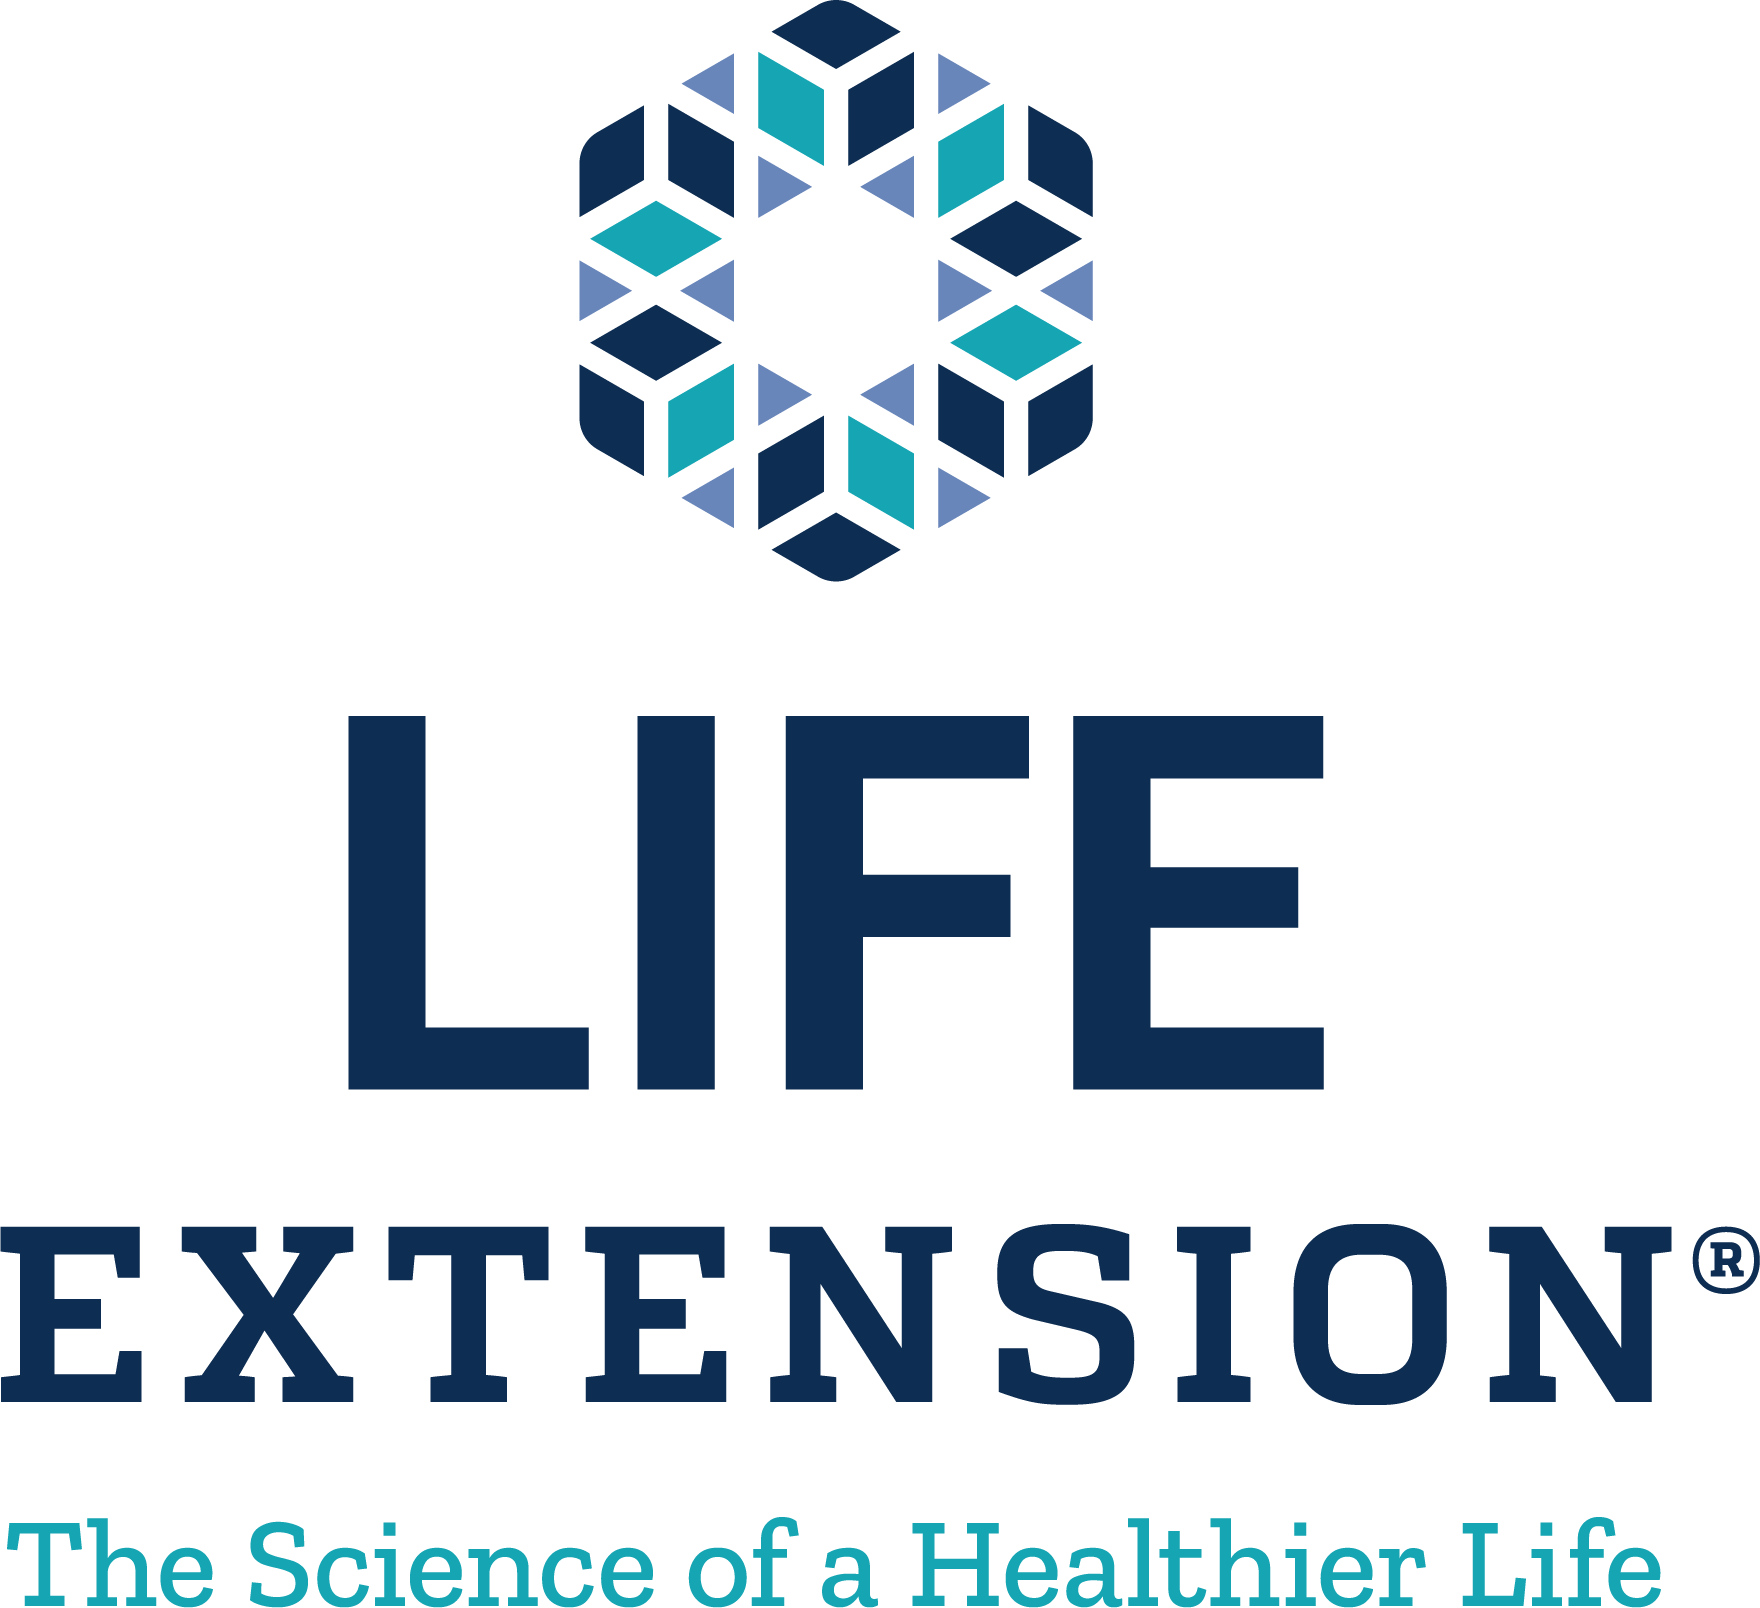 For 40 years, Life Extension has pursued innovative advances in health, conducting rigorous clinical trials and setting some of the most demanding standards in the industry to offer a full range of quality vitamins and nutritional supplements and blood-testing services. Life Extension’s Wellness Specialists provide personalized counsel to help customers choose the right products for optimal health, nutrition and personal care. To learn more, visit LifeExtension.com.